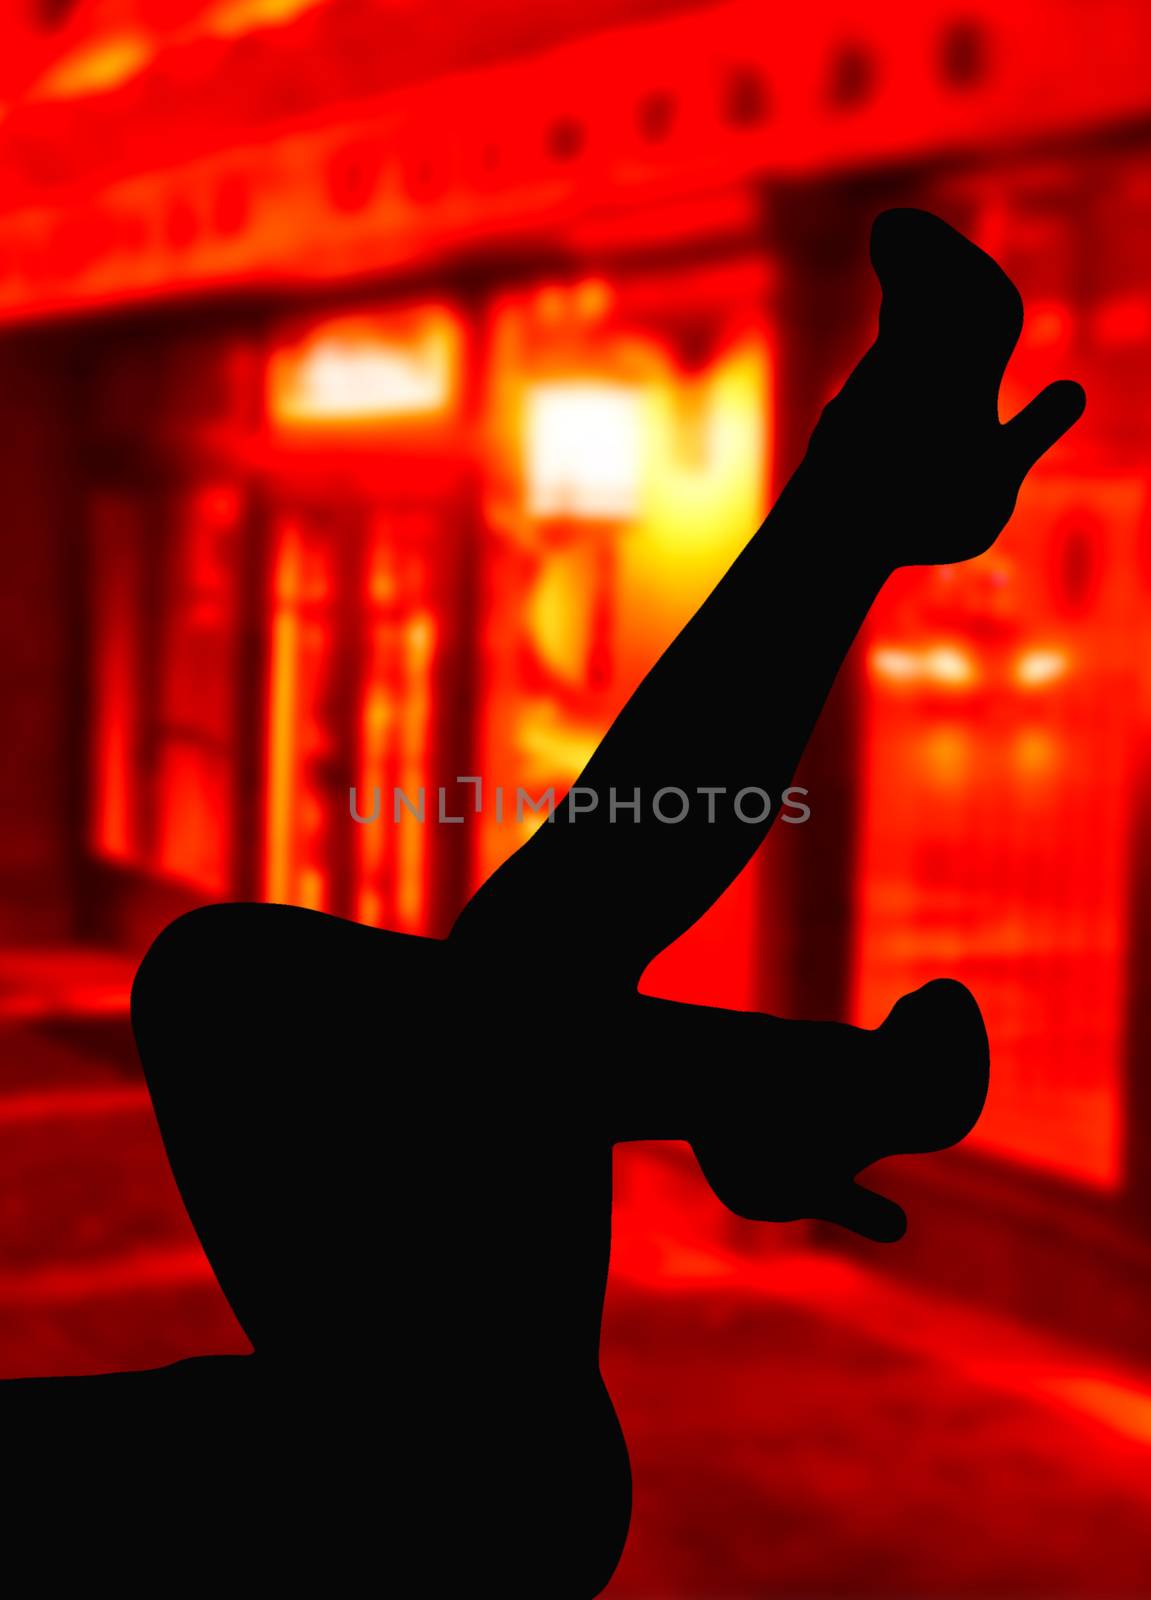 Silhouette of some sexy feminine legs on the street in front of red windows hooker street background by charlottebleijenberg